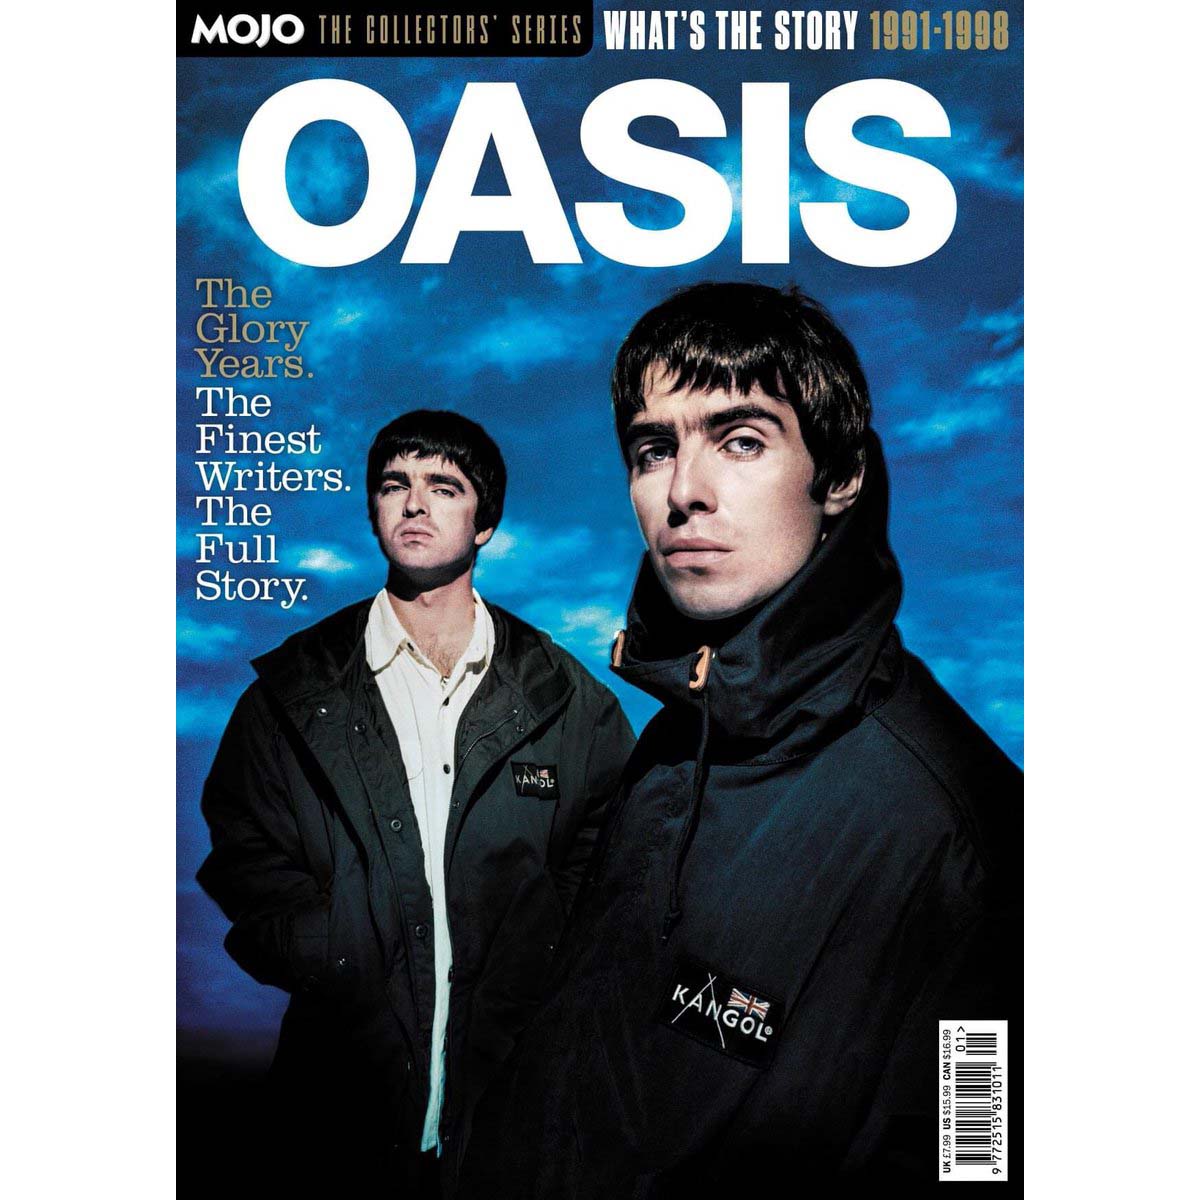 Mojo: The Collectors' Series: Oasis - What's the Story Pt 1 (1991-1998)